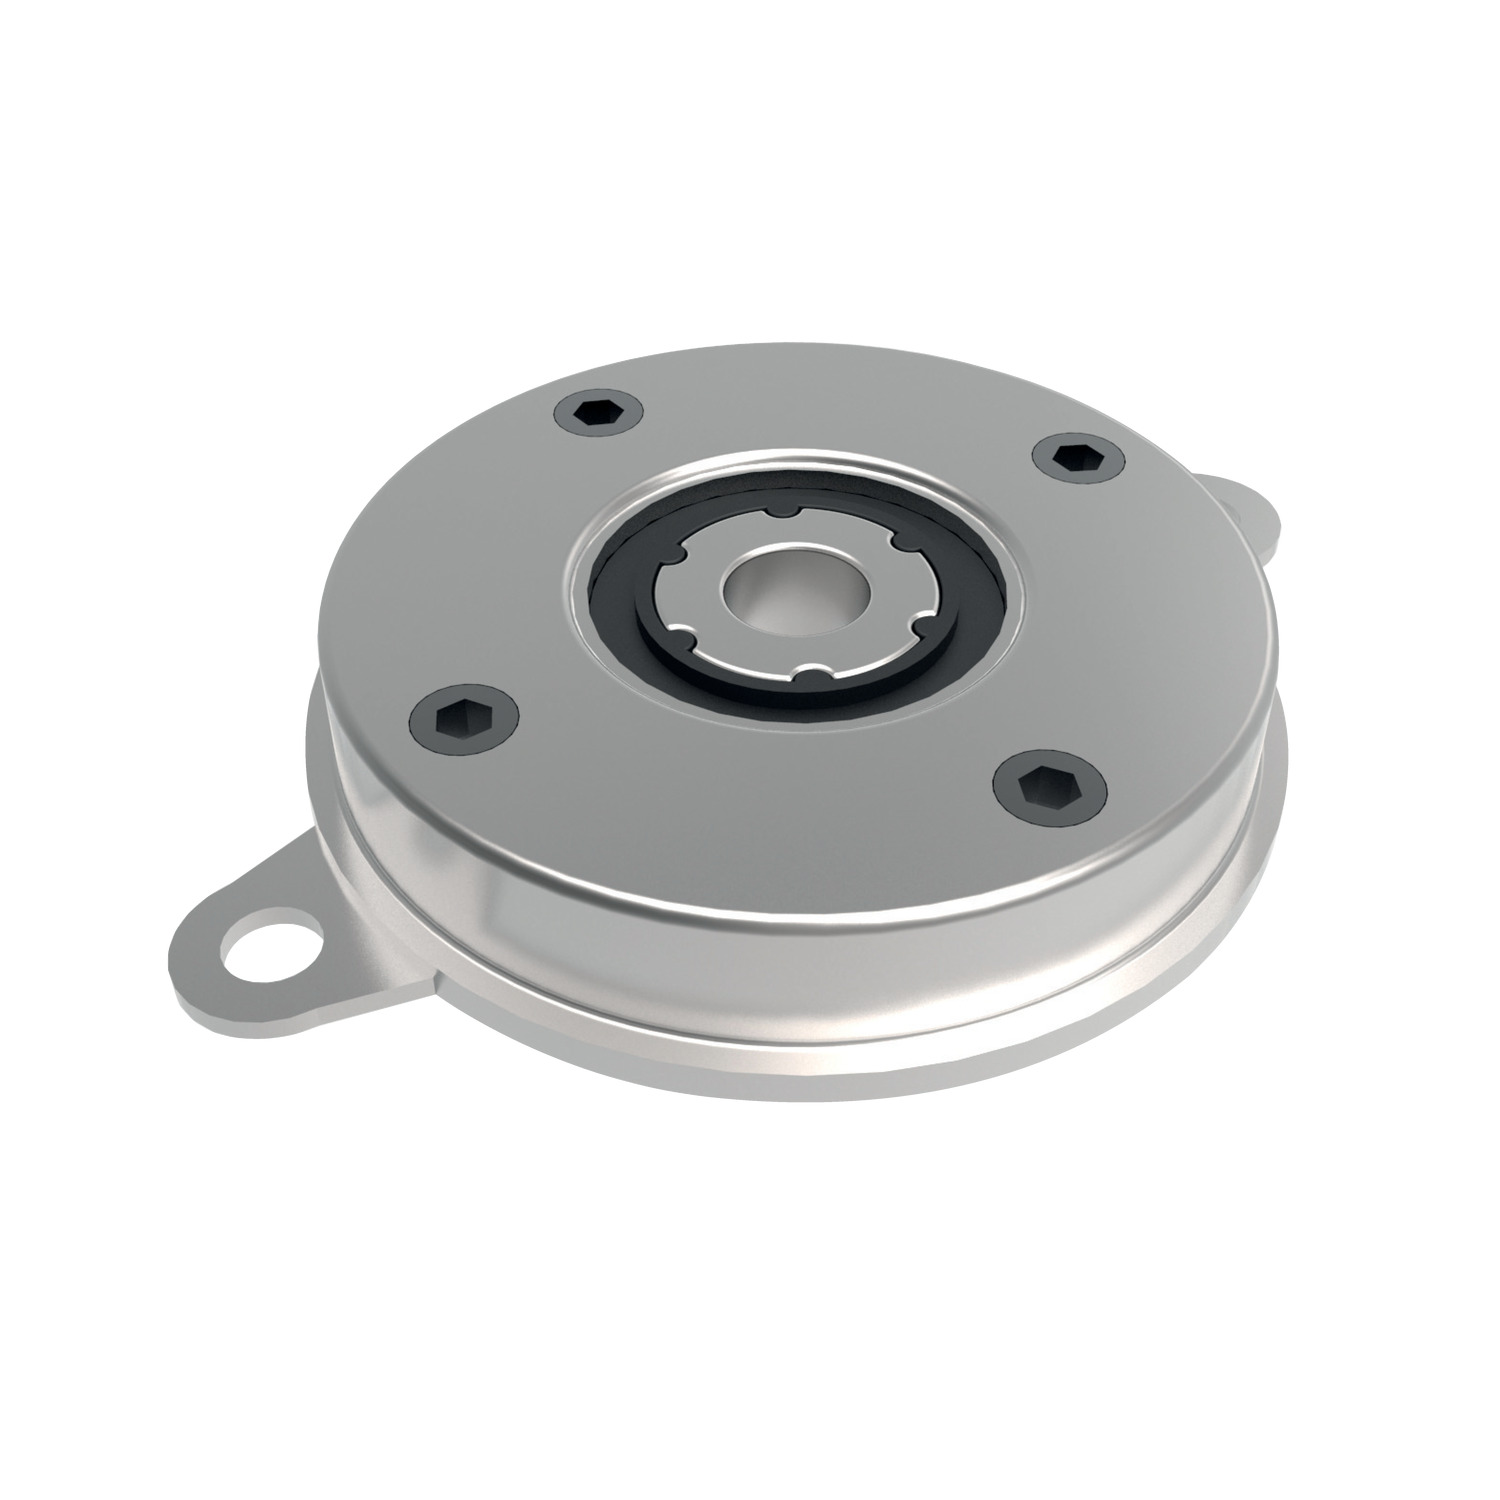 Q3240.AC0140 Disk Dampers, 4.0Nm With Gear, Counter Clockwise